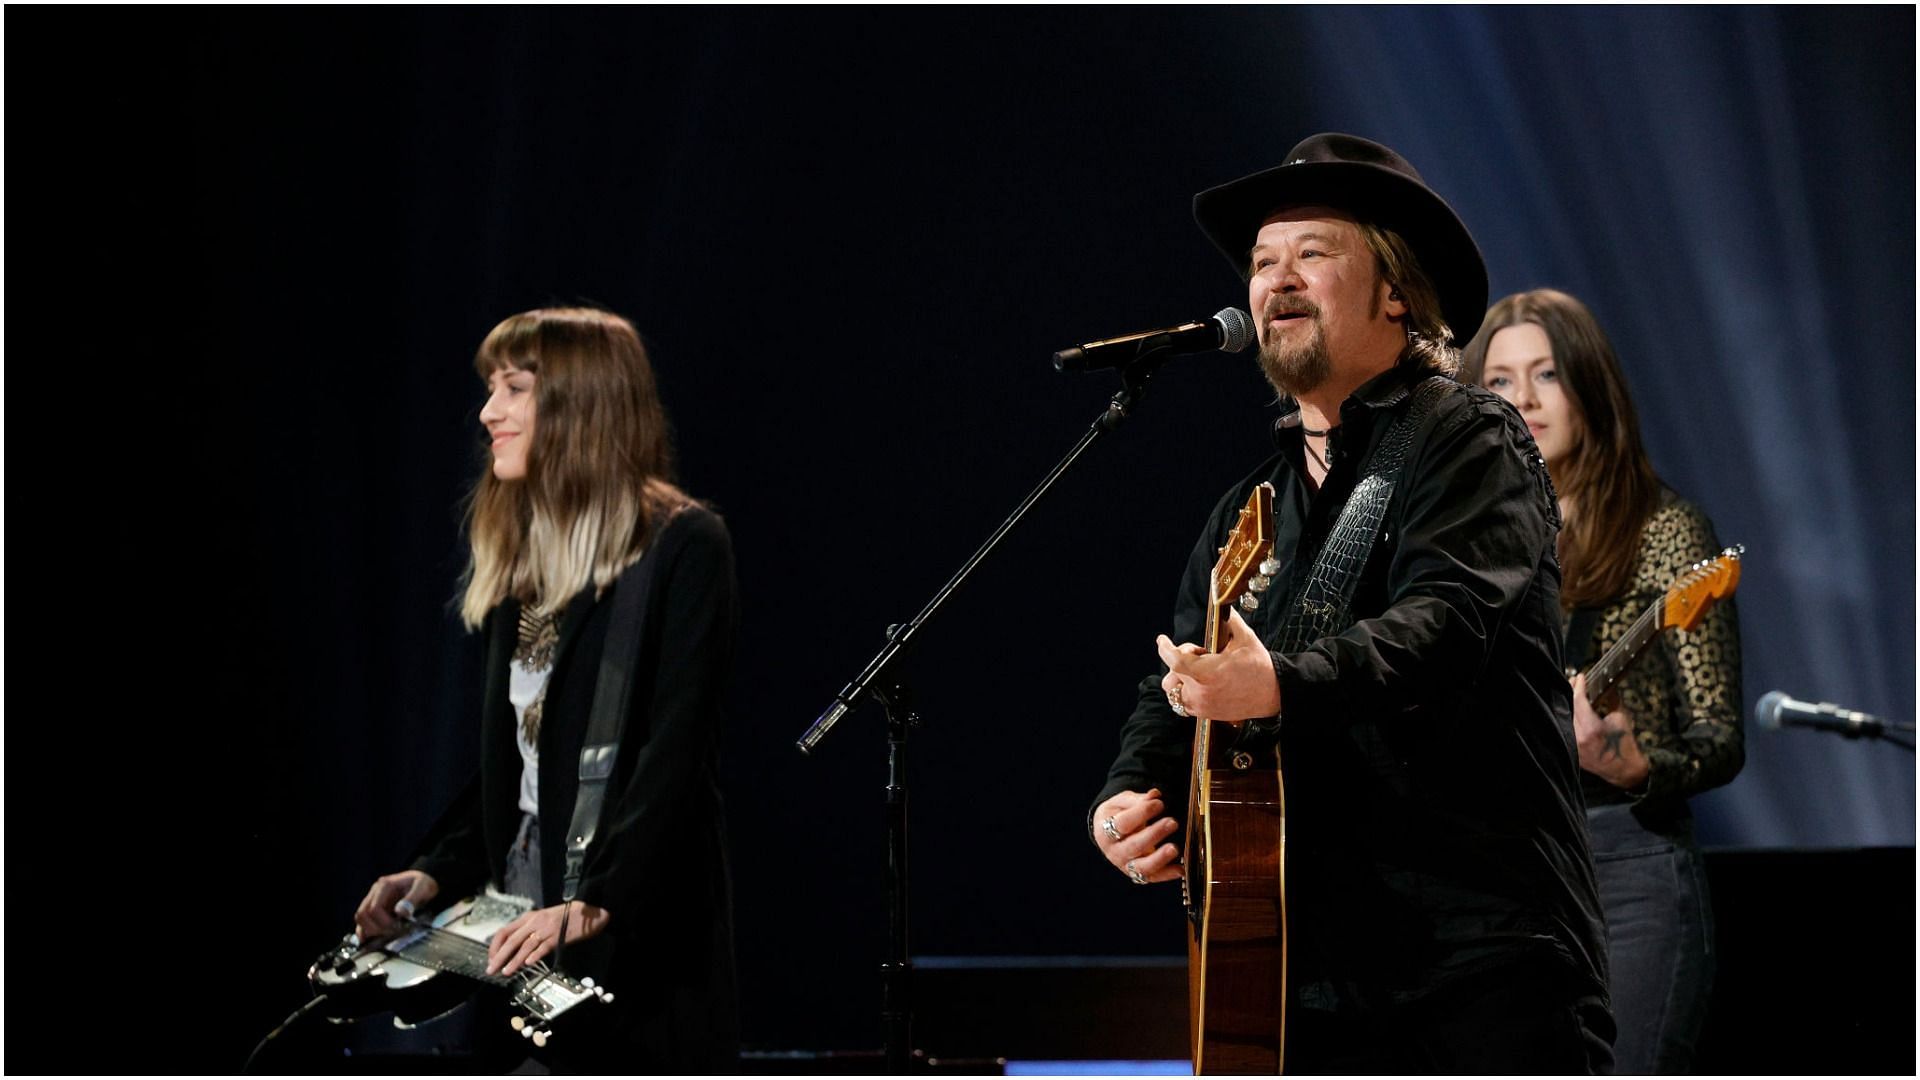 Megan Lovell and Rebecca Lovell of Larkin Poe perform with Travis Tritt during America Salutes You Presents: A Tribute To Billy Gibbons, A Live Benefit Concert at The Grand Ole Opry on May 16, 2021, in Nashville, Tennessee (Image via Getty Images)